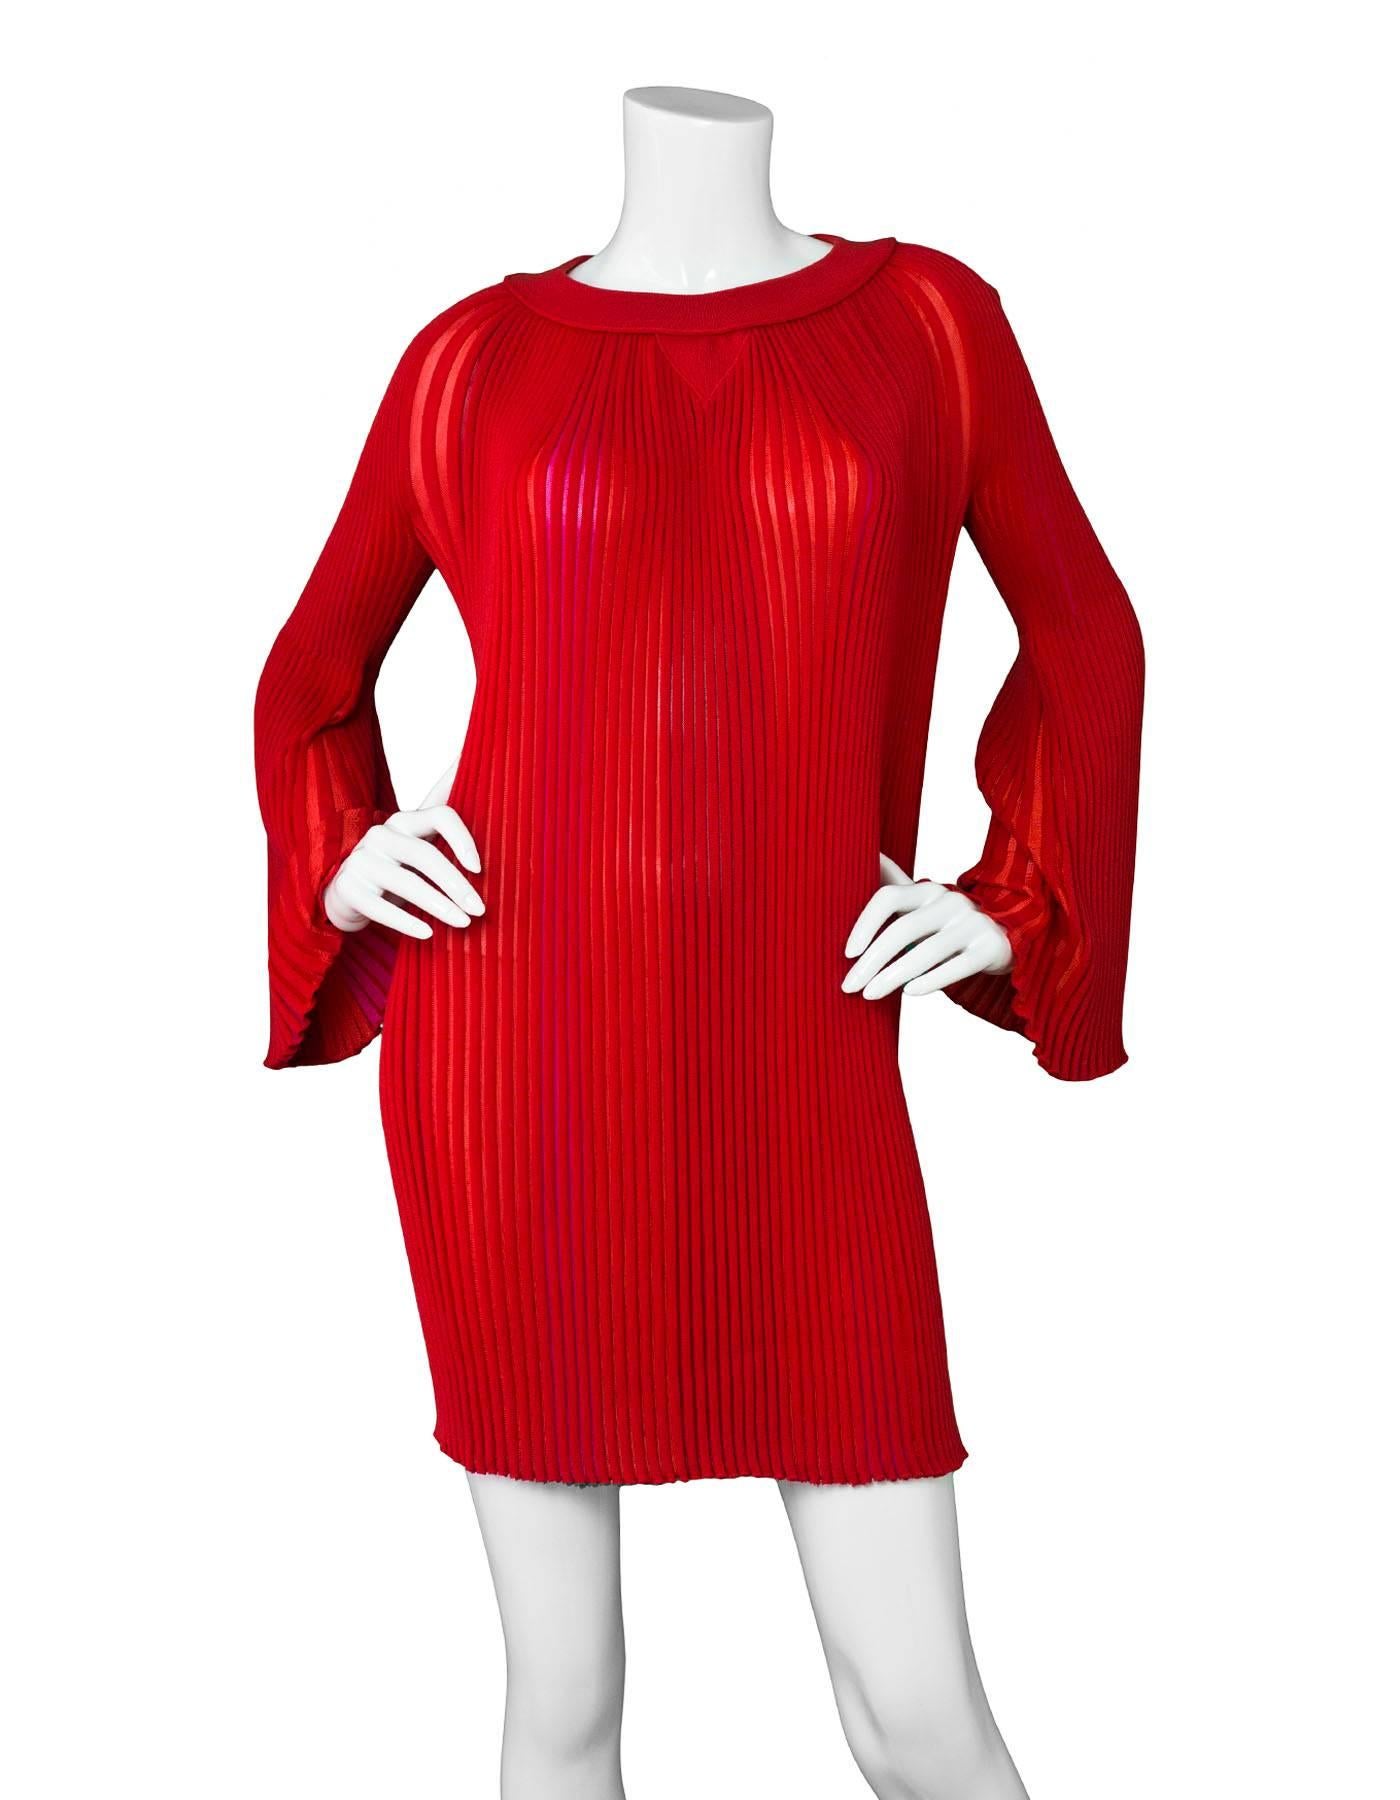 Sonia Rykiel Red Pleated Dress Sz Small

Color: Red
Composition: Not listed, feels like cotton blend
Lining: None
Closure/Opening: Pull over
Overall Condition: Excellent pre-owned condition
Marked Size: Small
Bust: 33"
Waist: 24"
Hips: